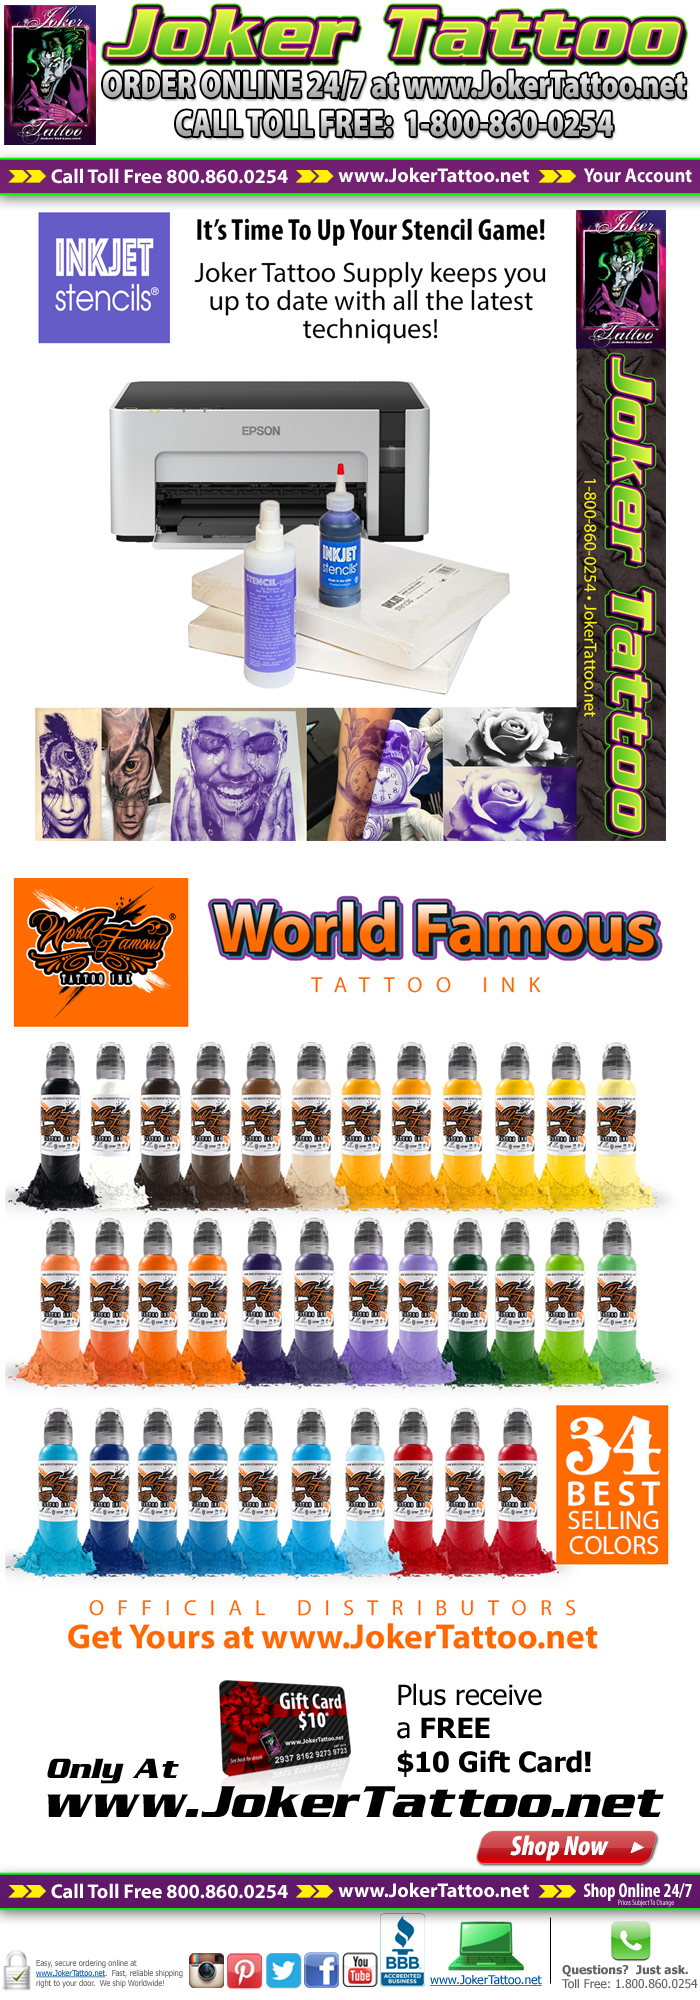 New Products at Joker Tattoo Supply! Plus, receive free ground shipping in the lower 48 US States (some products do not qualify for free shipping) and a FREE $10 Gift Card with your order!